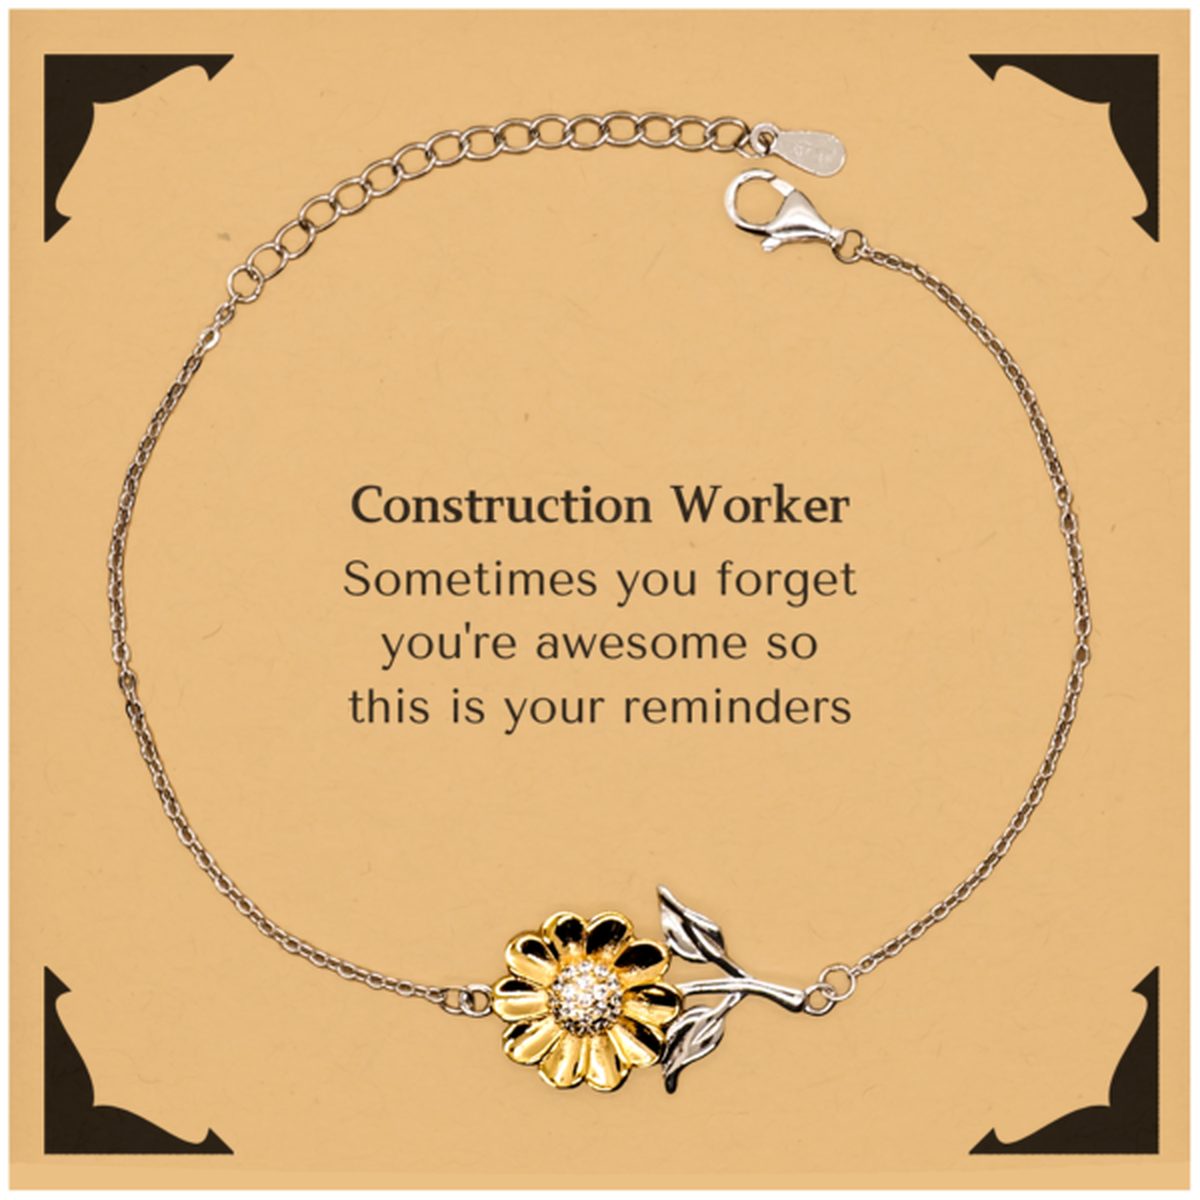 Sentimental Construction Worker Sunflower Bracelet, Construction Worker Sometimes you forget you're awesome so this is your reminders, Graduation Christmas Birthday Gifts for Construction Worker, Men, Women, Coworkers